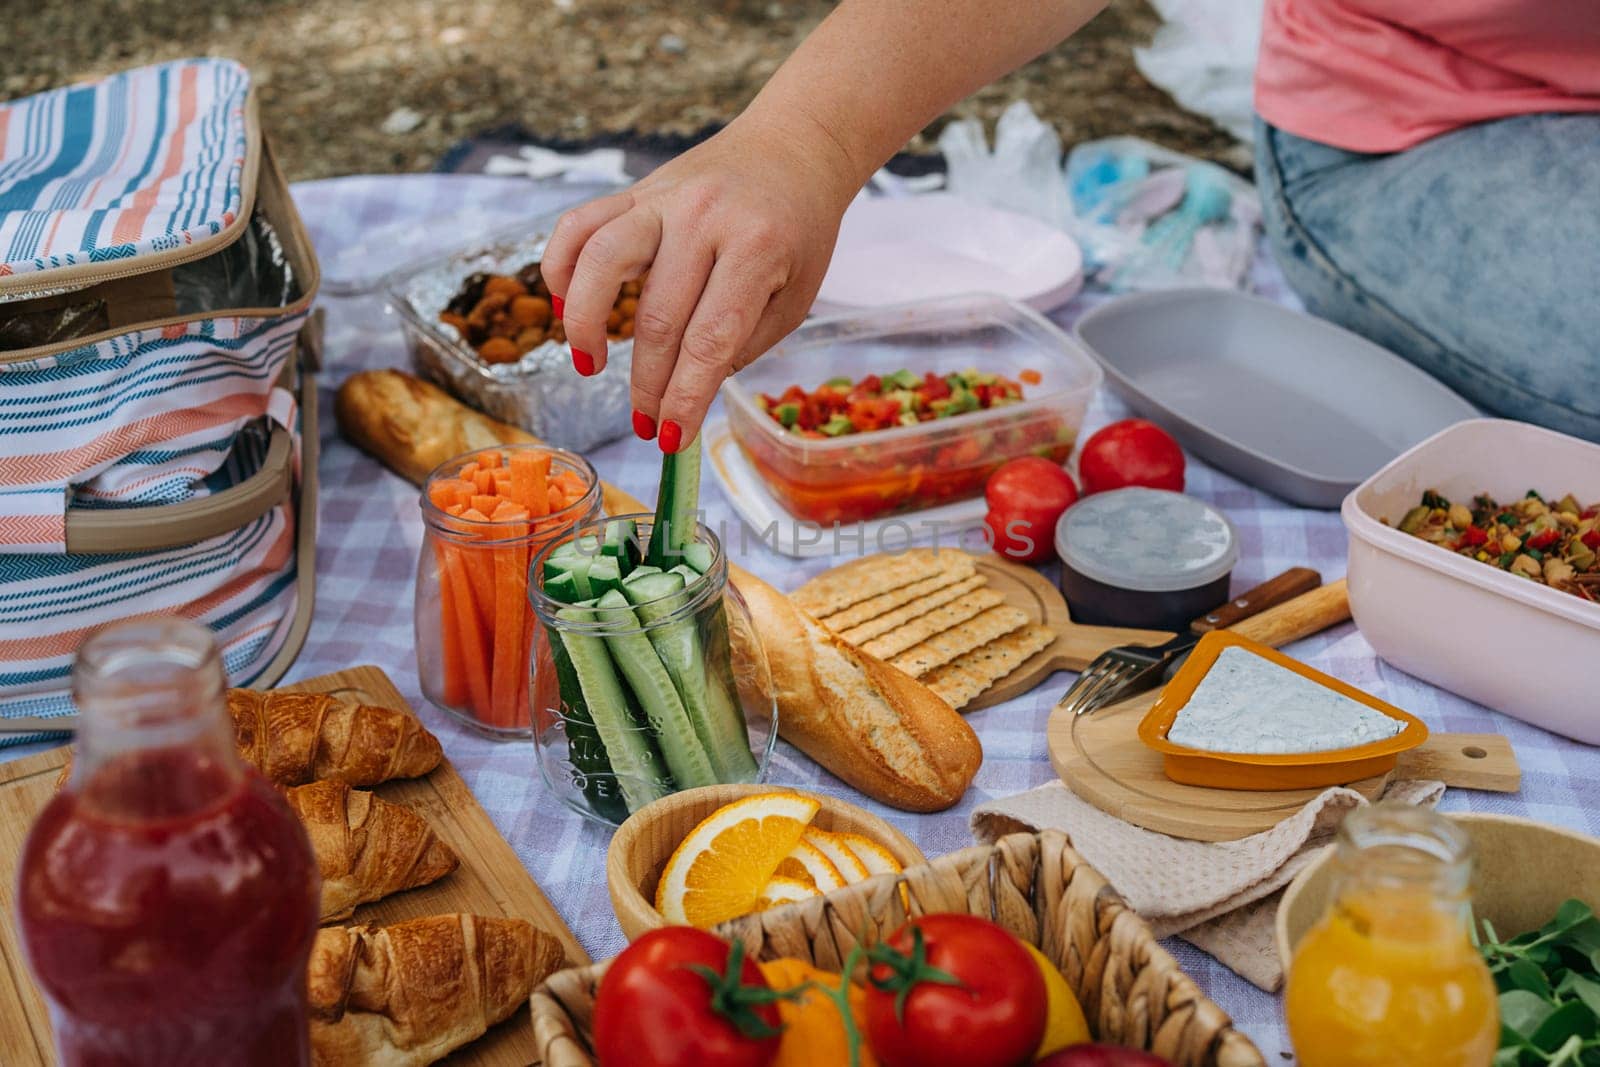 Picnic in the forest camping site with vegetables, juice, cheese, and croissants. Fresh organic veggies surrounded with bread baguettes, salads by Ostanina